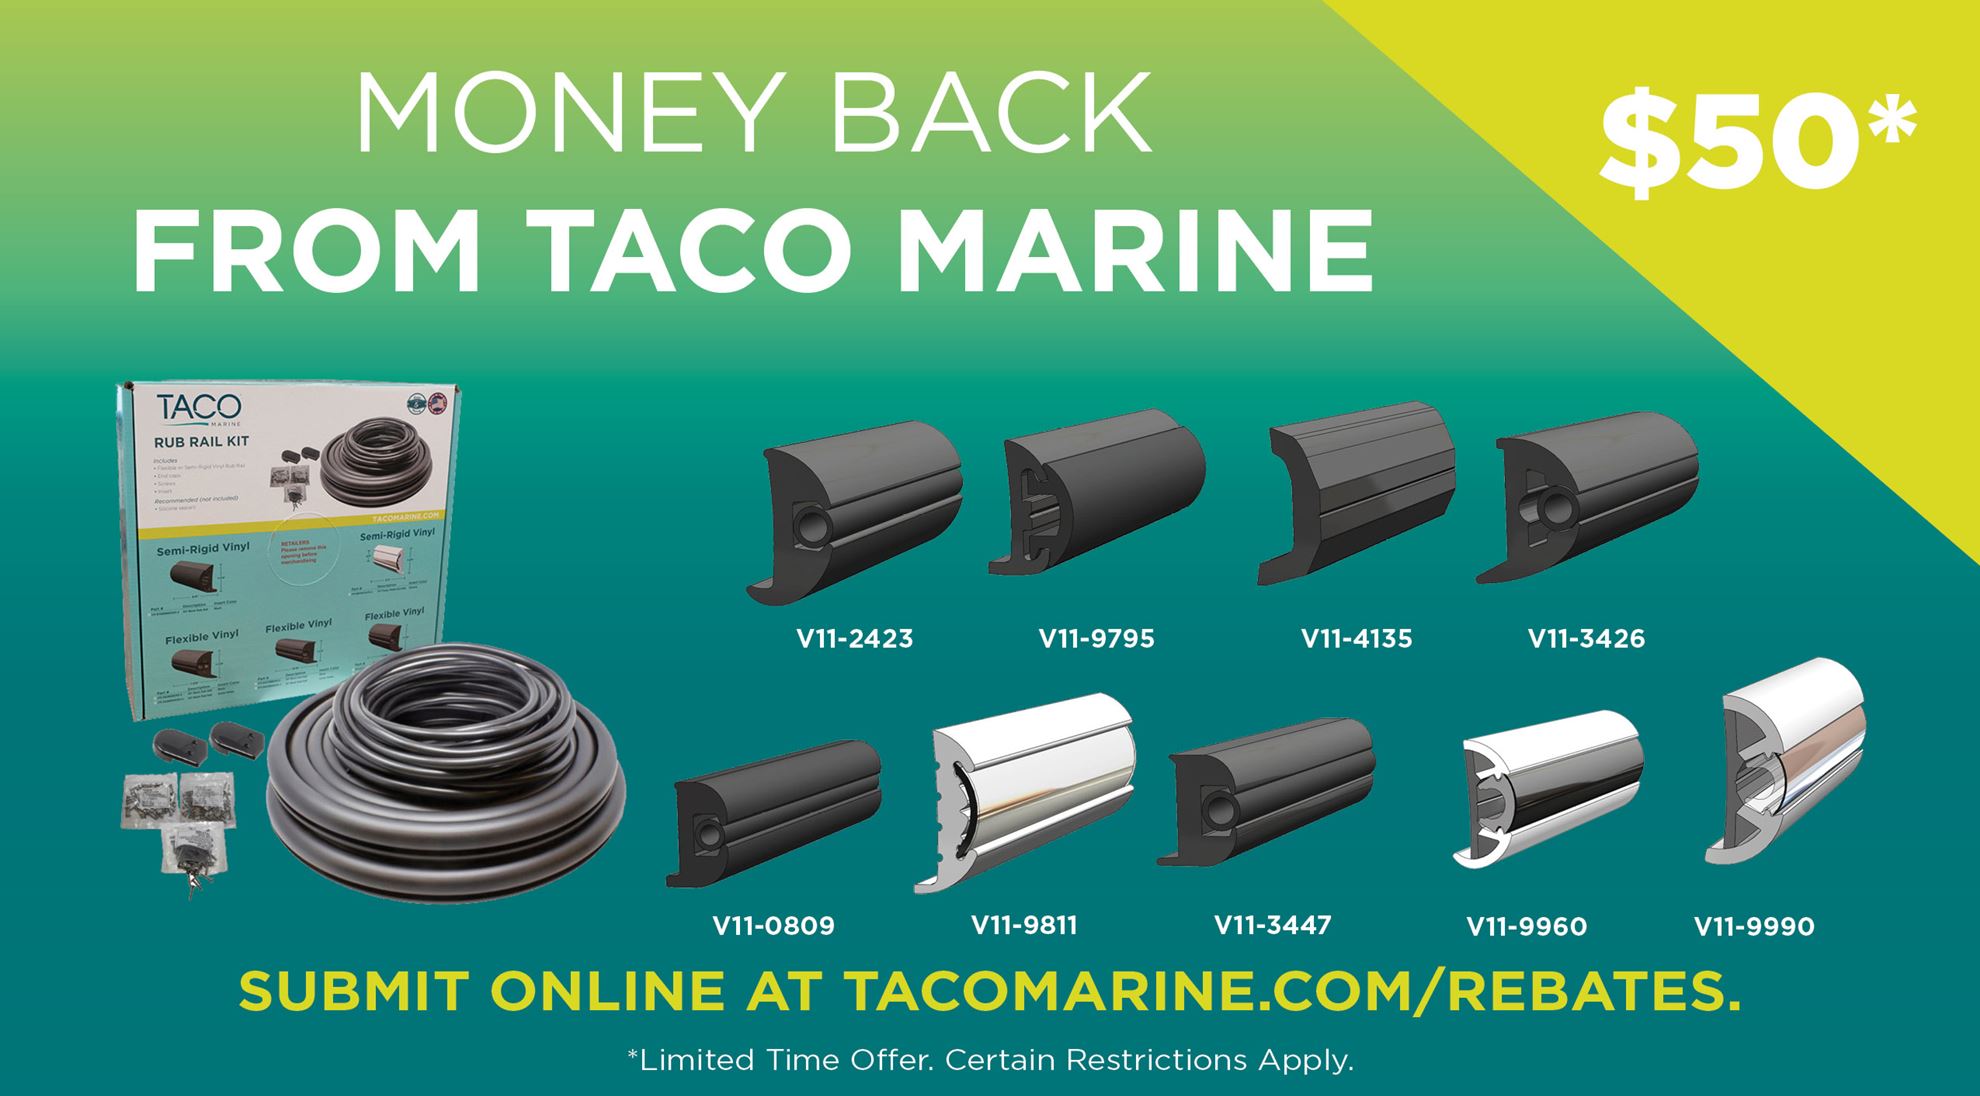 💰MONEY BACK with Rebates From TACO